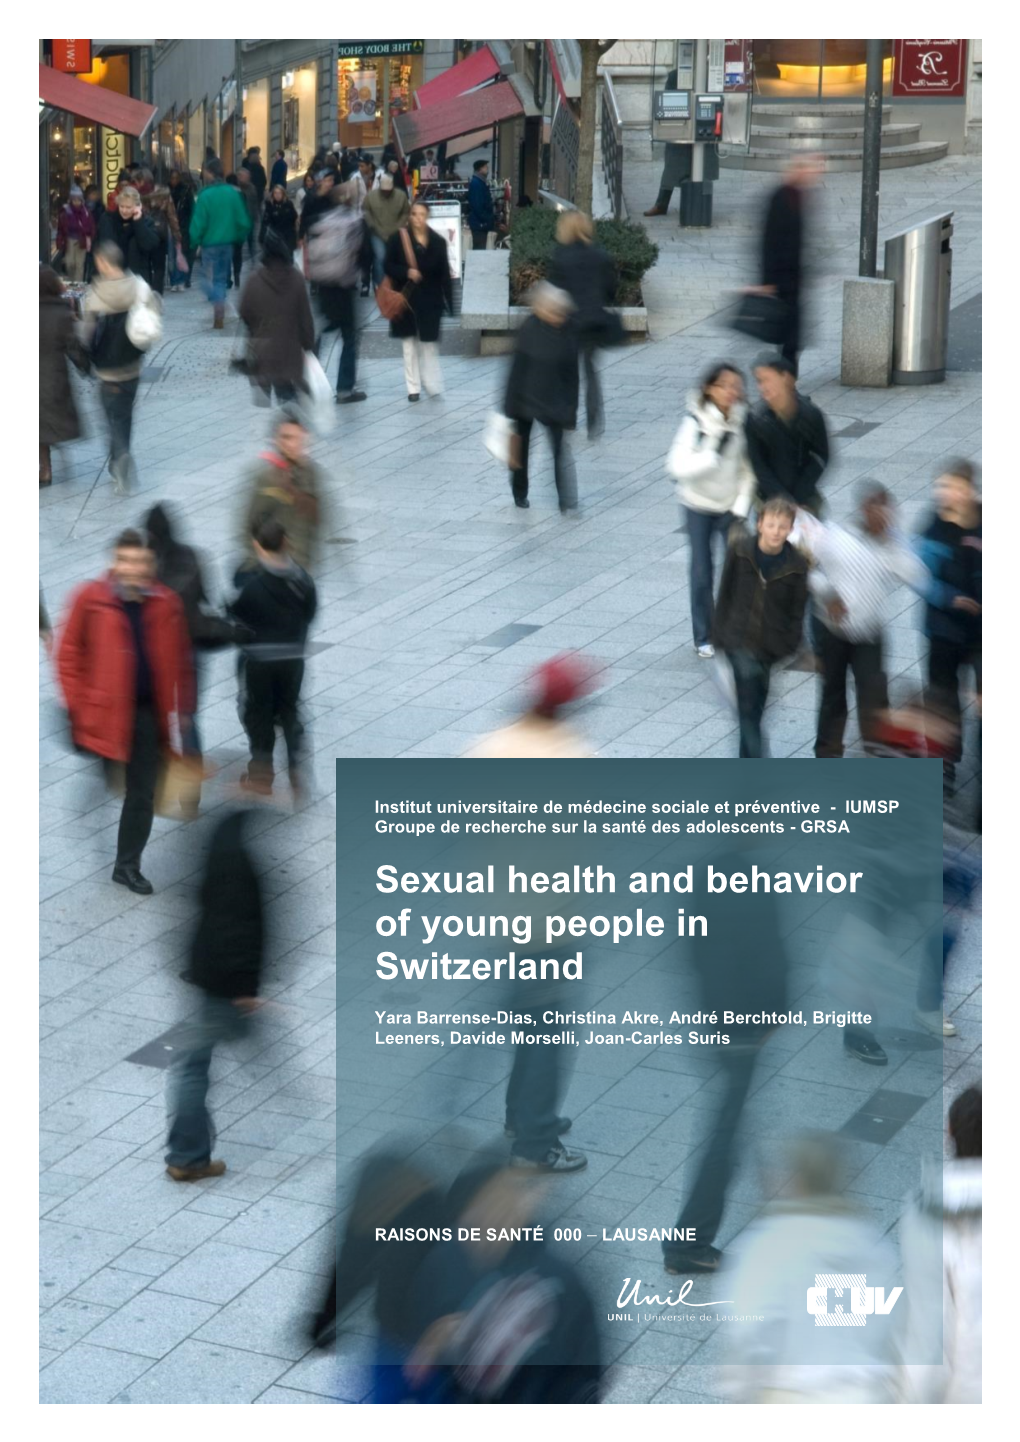 Sexual Health and Behavior of Young People in Switzerland